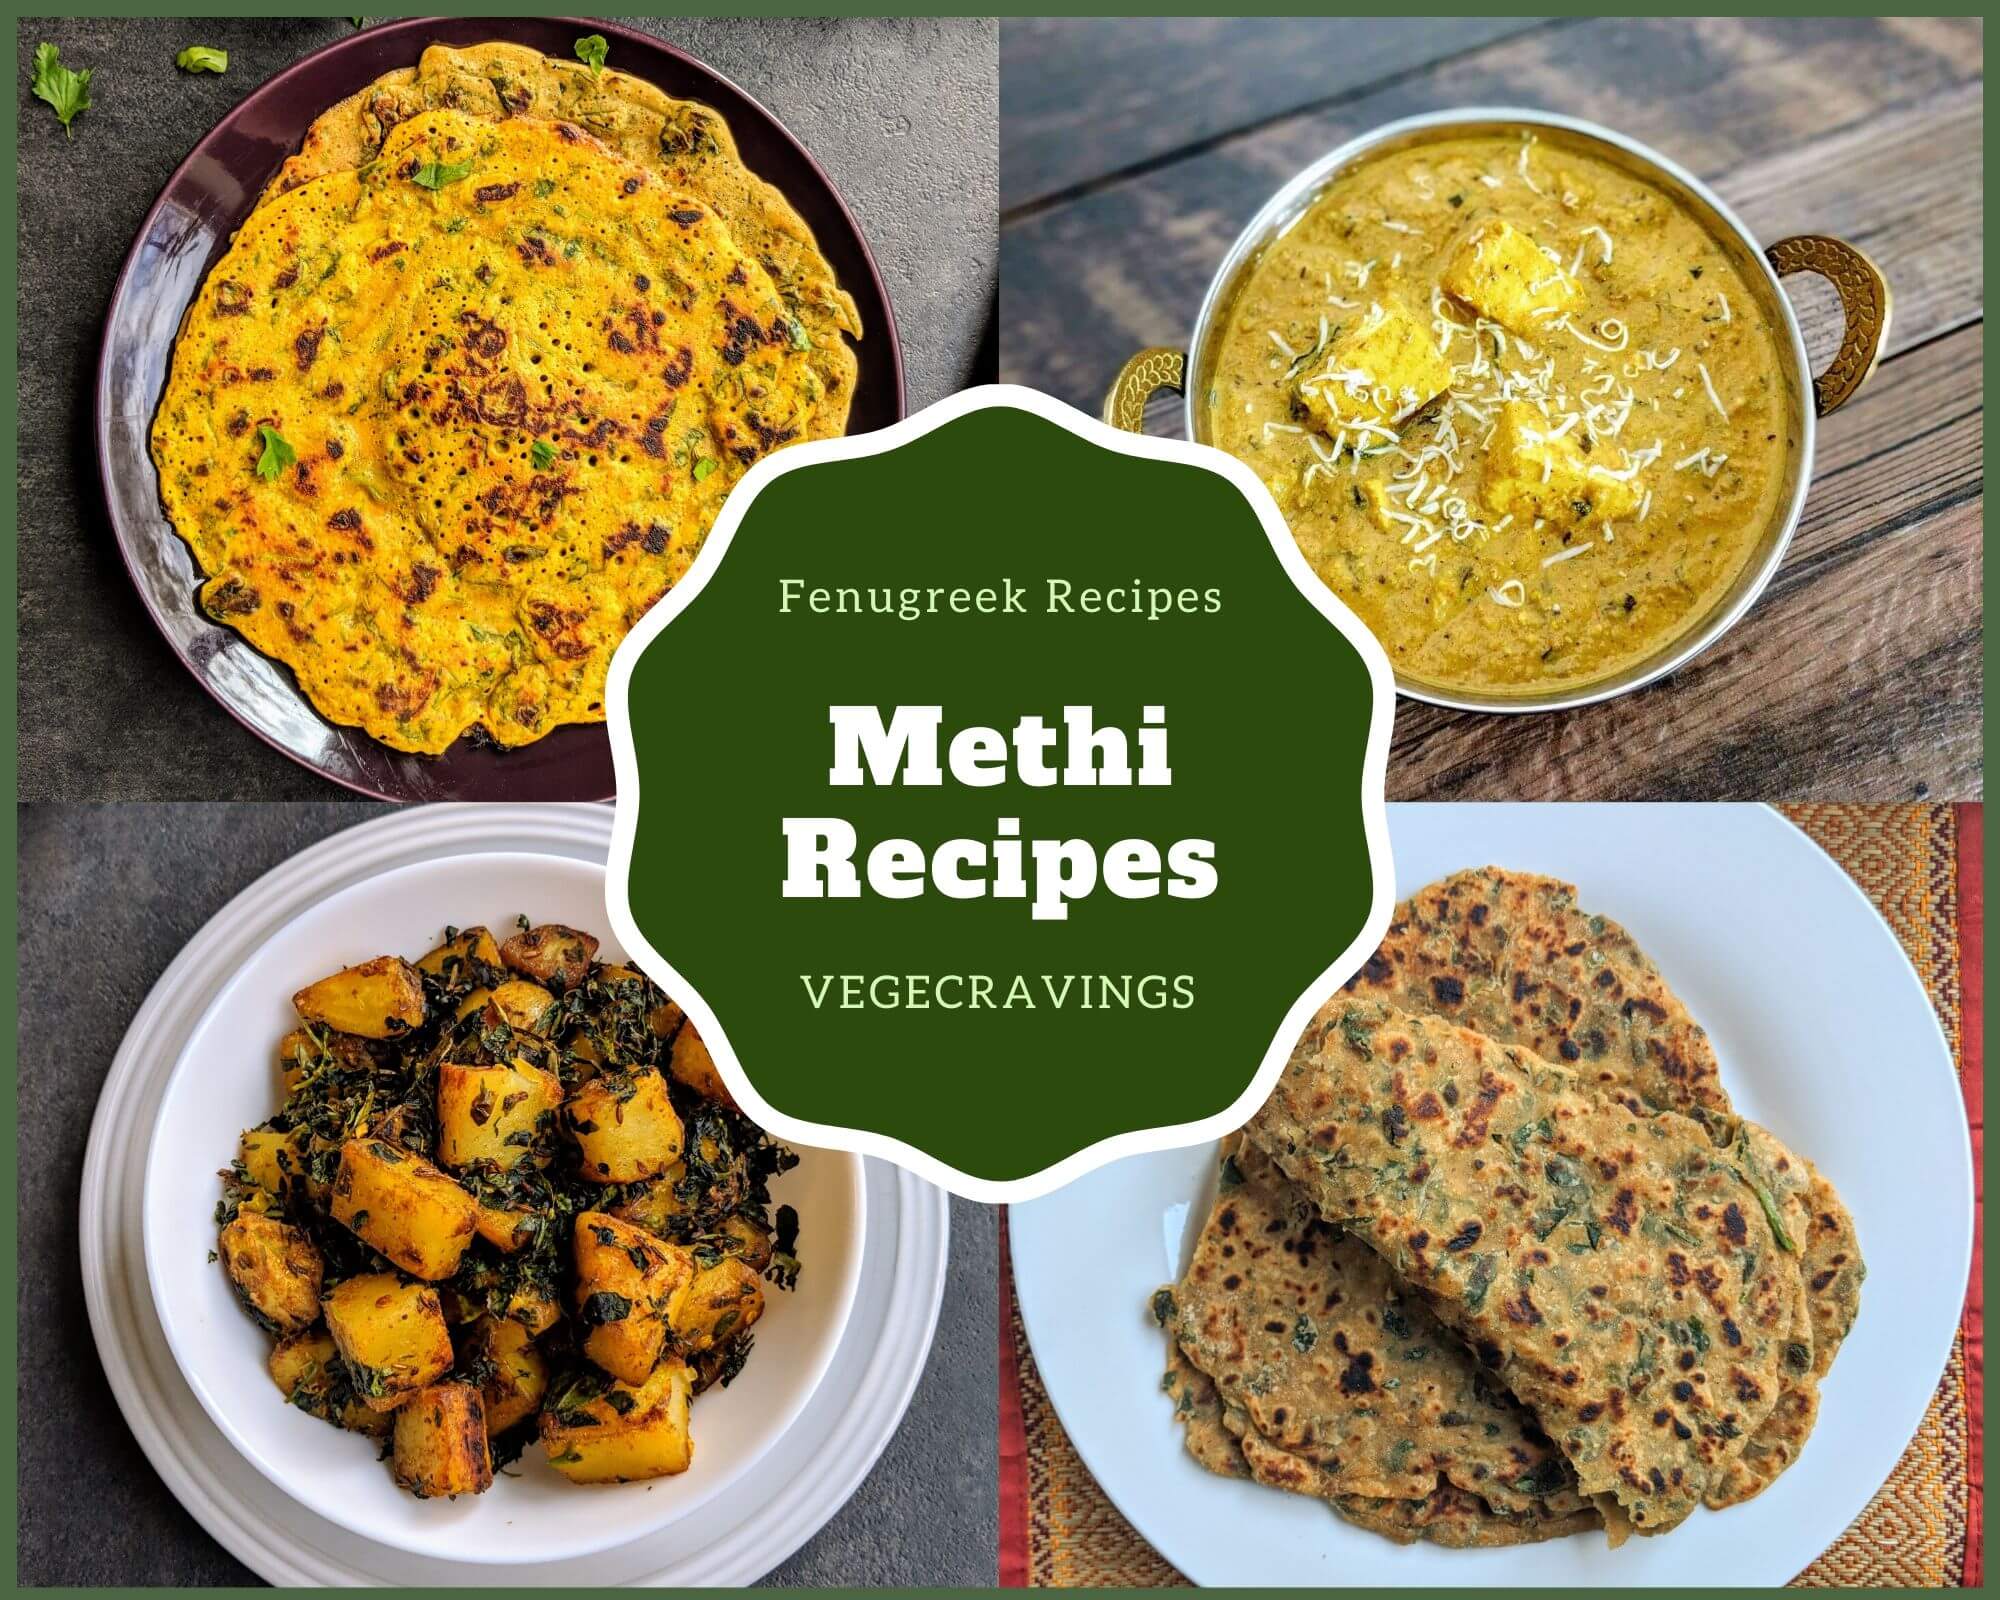 Methi recipes or fenugreek recipes are an integral part of Indian cooking. It is often eaten raw or mixed in curries, parathas or rice.